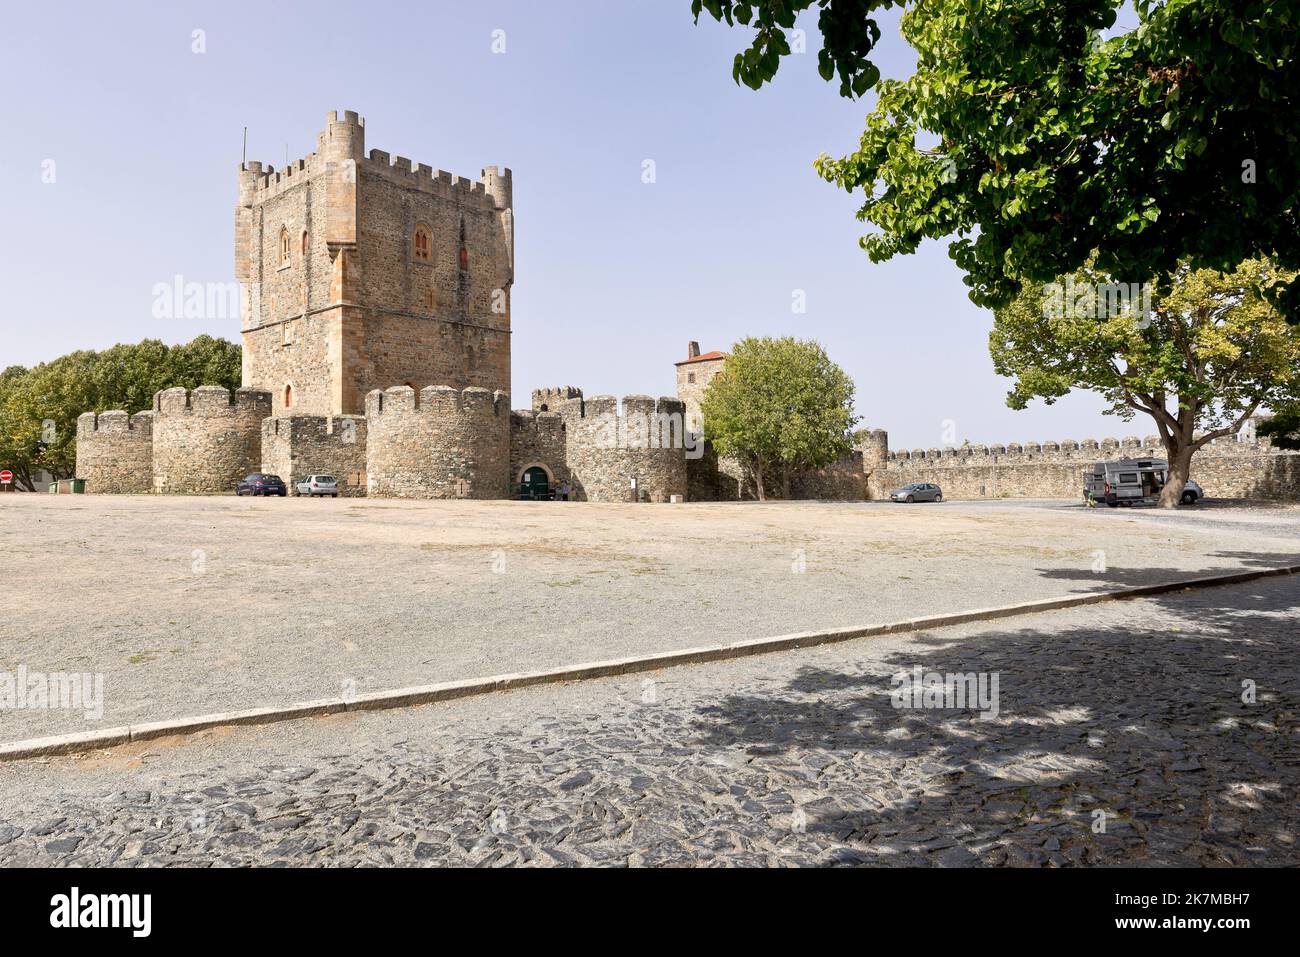 Braganca old town and castle, Portugal Stock Photo